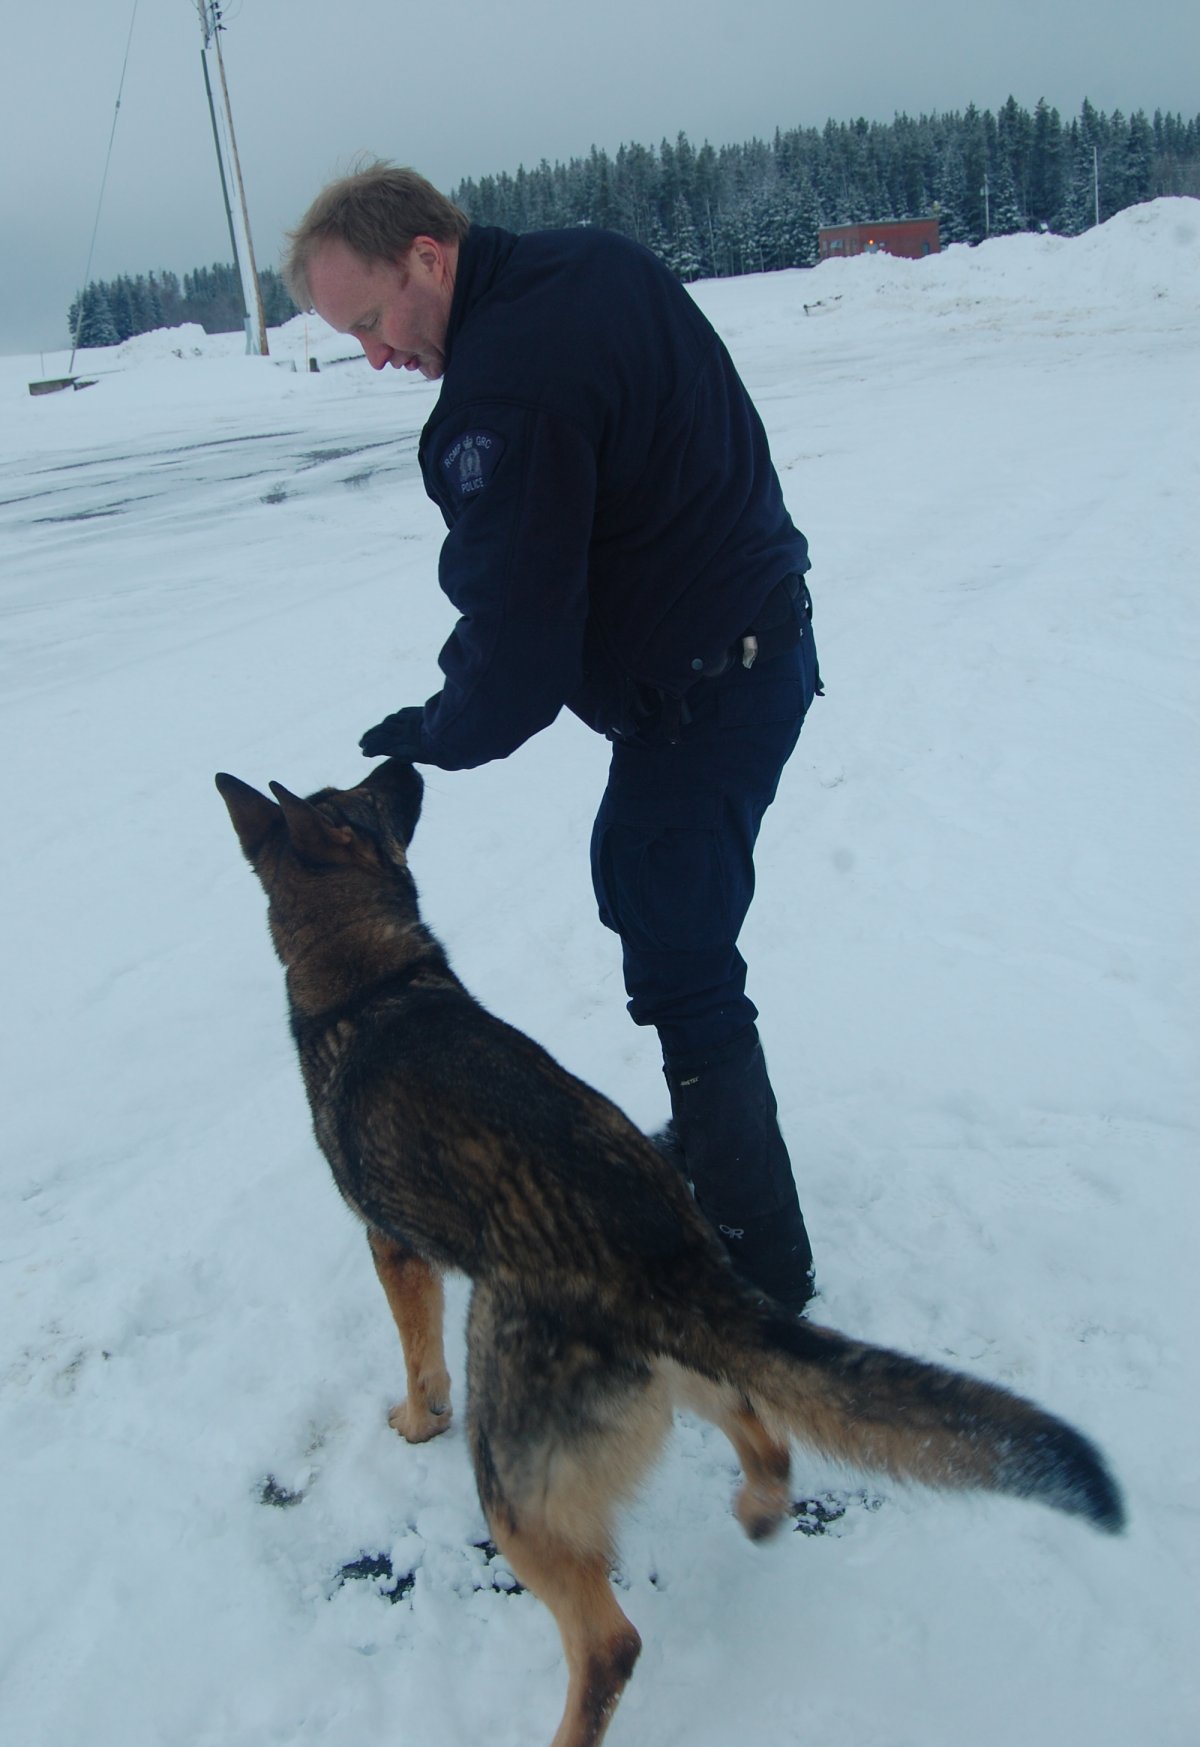 Rook and his handler Cpl. Trickett